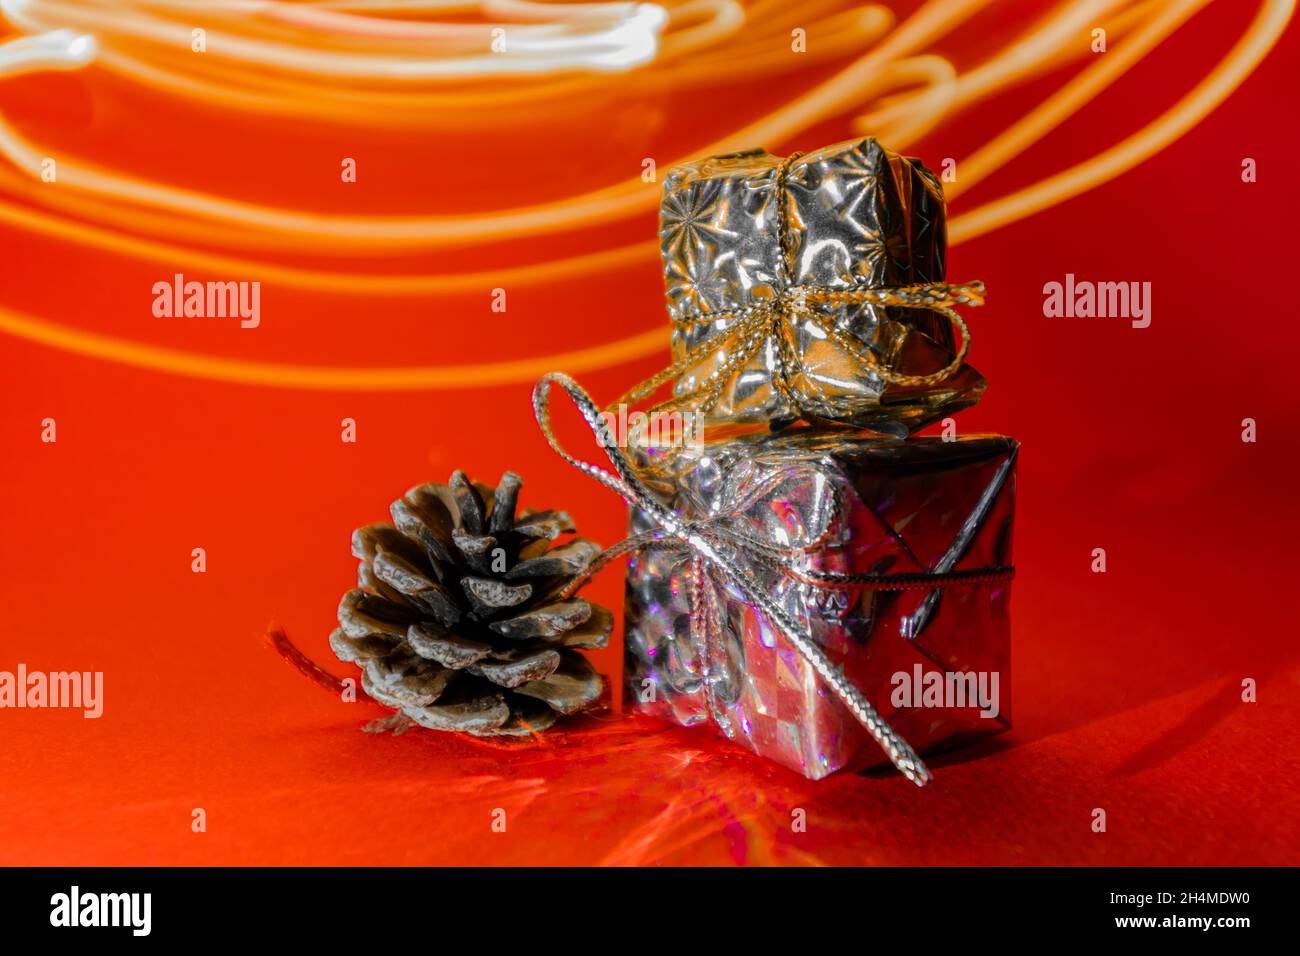 Two small gifts on a red background. Gifts in honor of the new year. Stock Photo